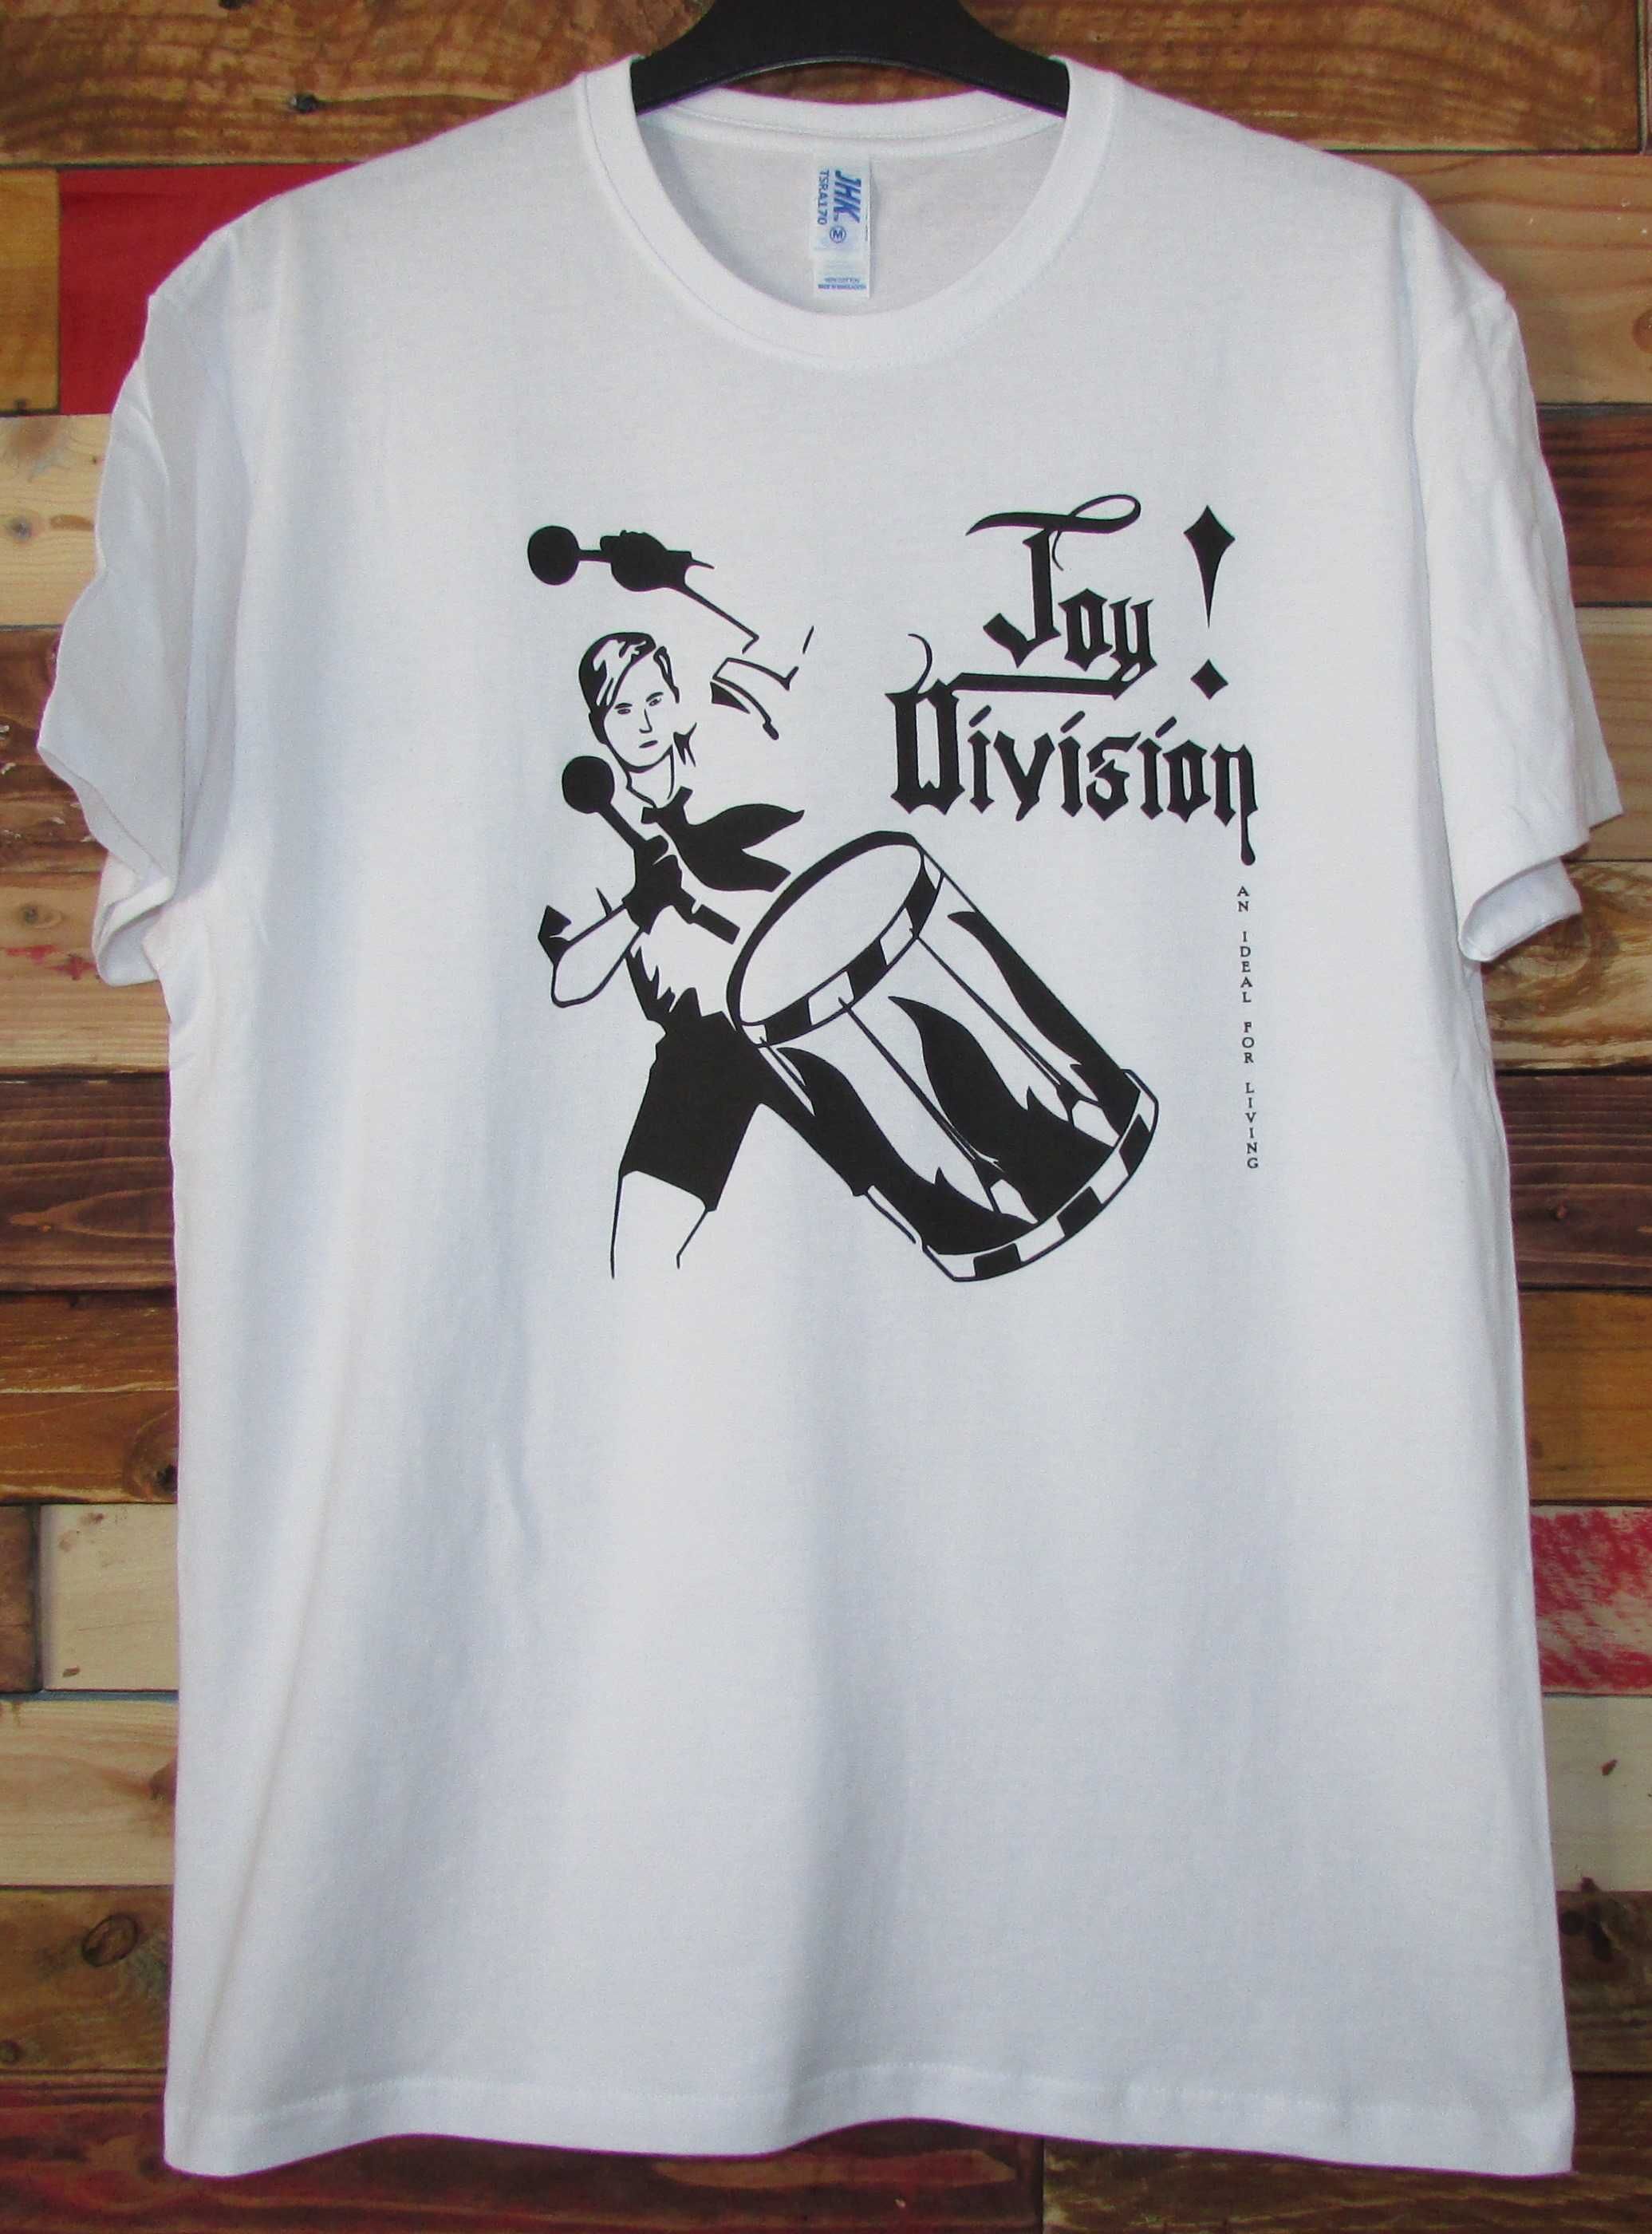 Joy Division / The Smiths / Echo & the Bunnymen / Morrissey - T-shirt